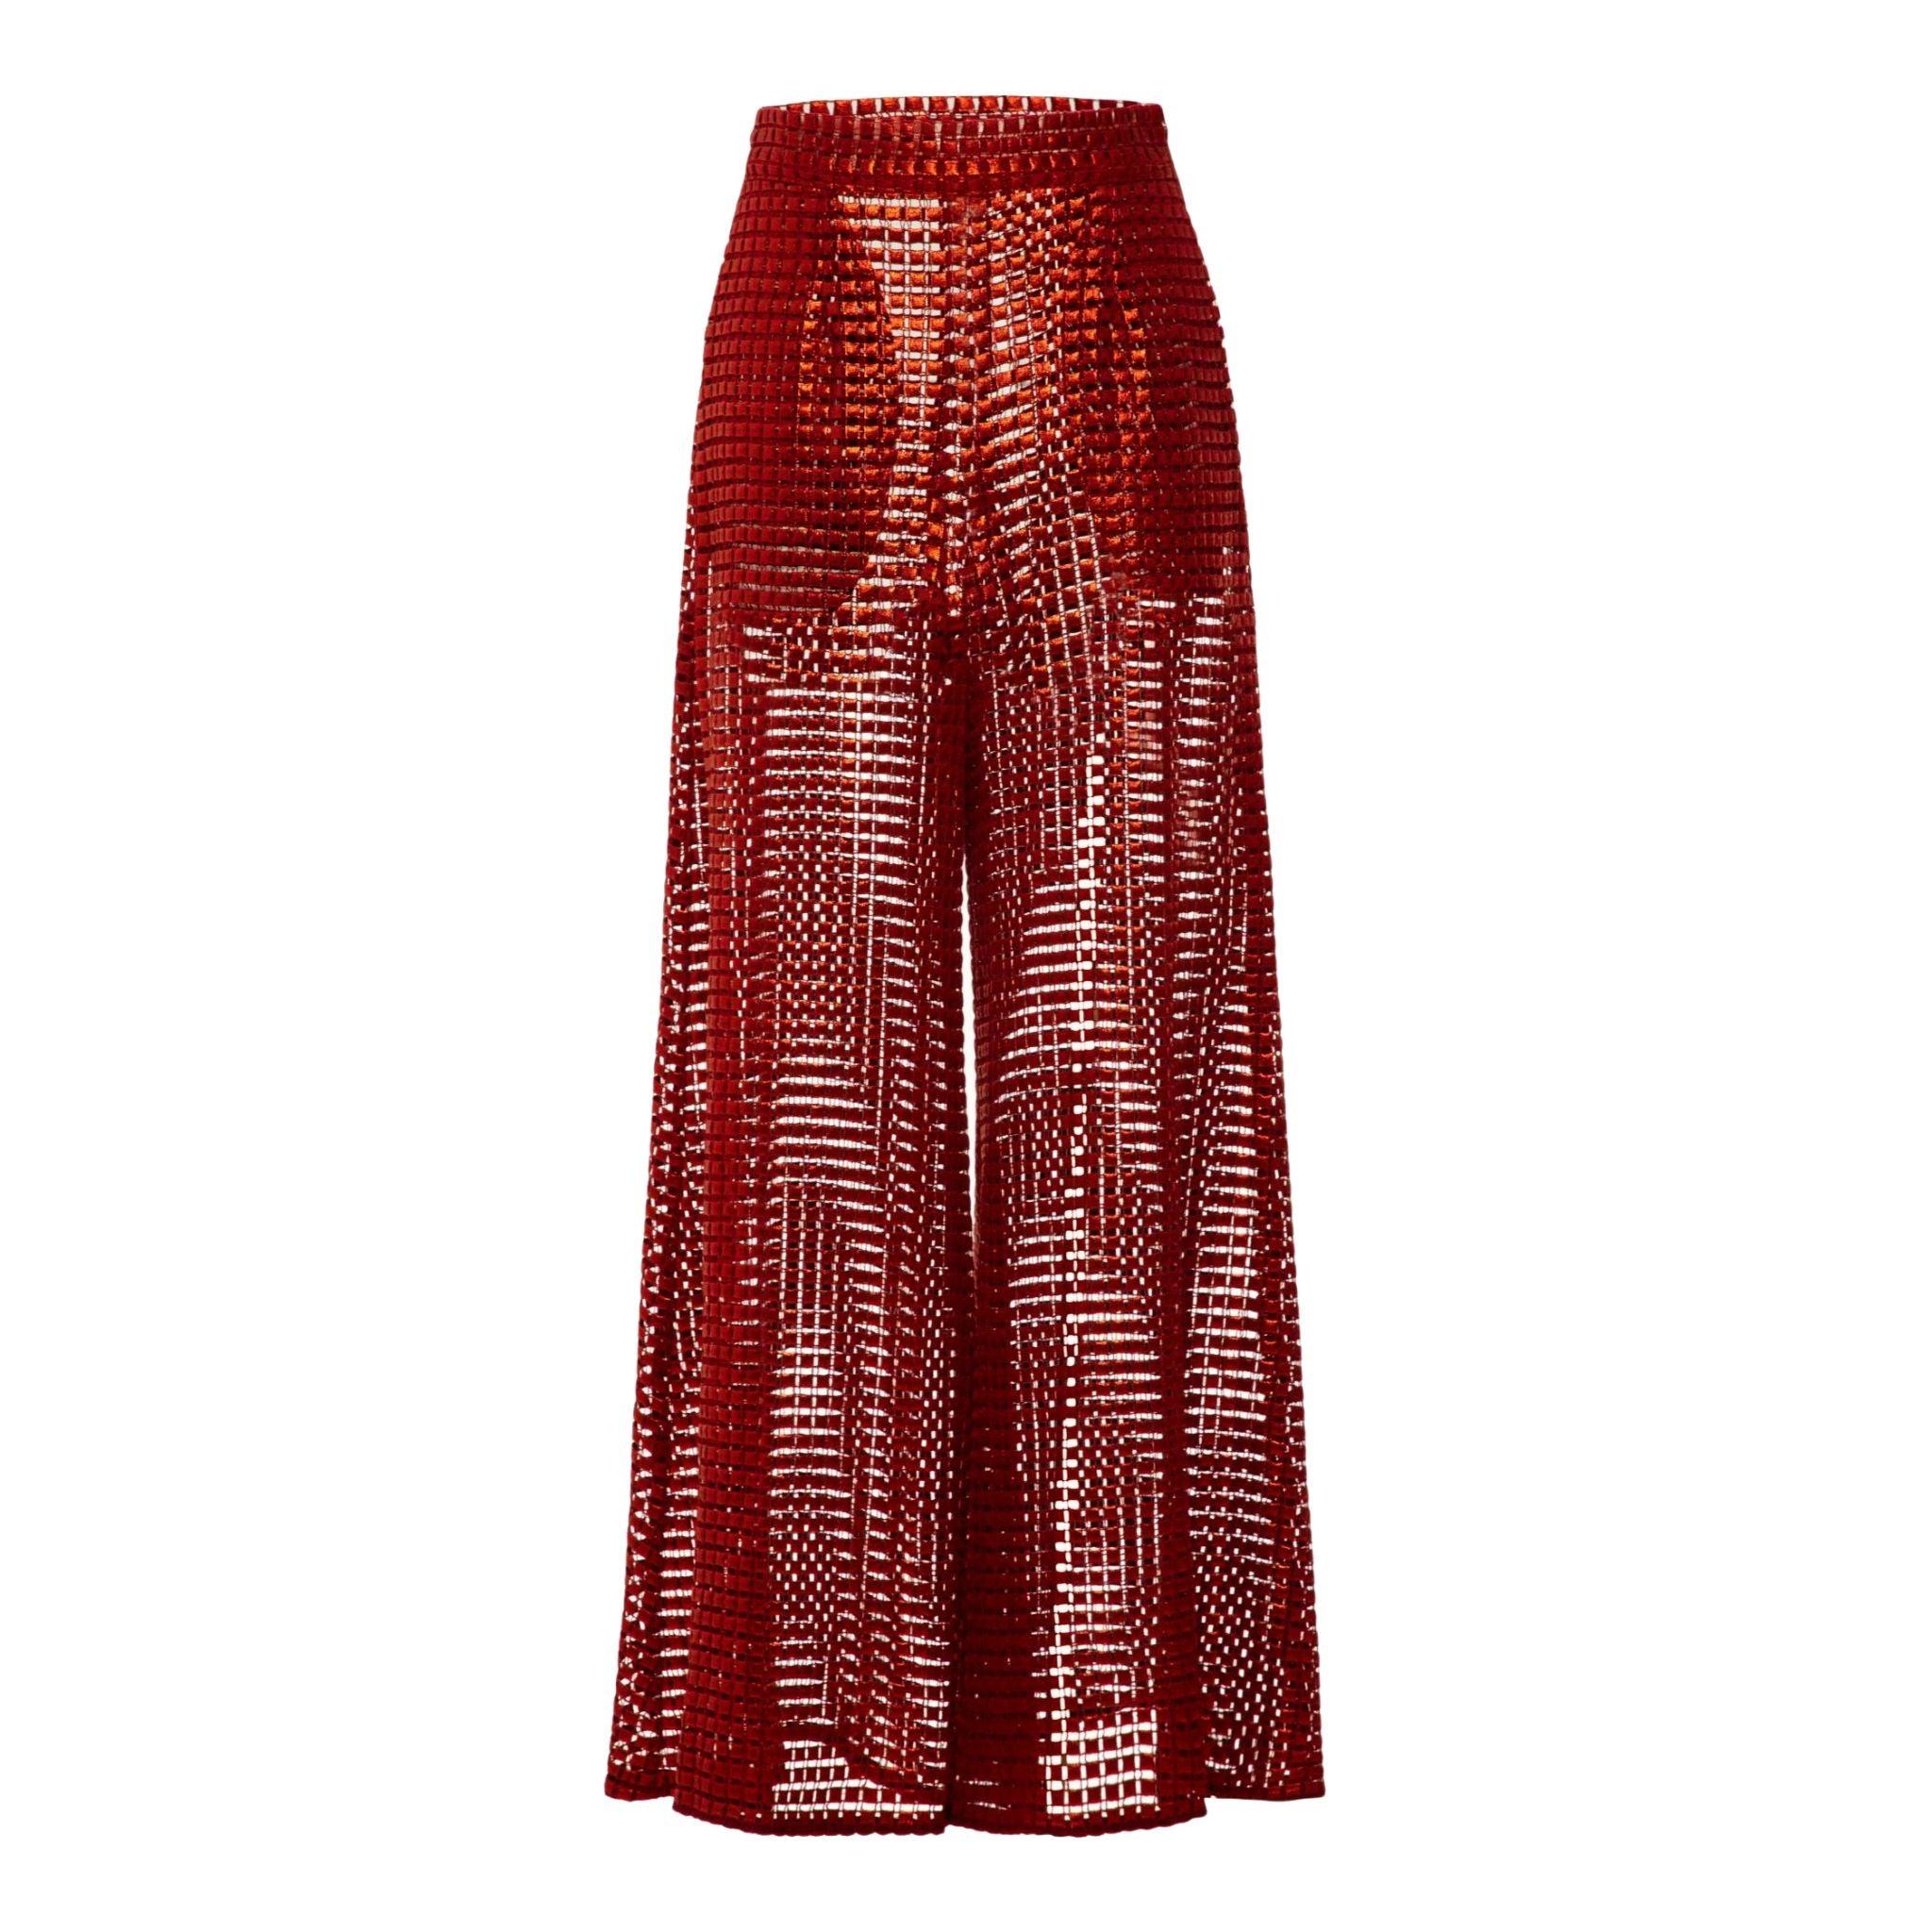 Galu Pants in red with side mesh detail